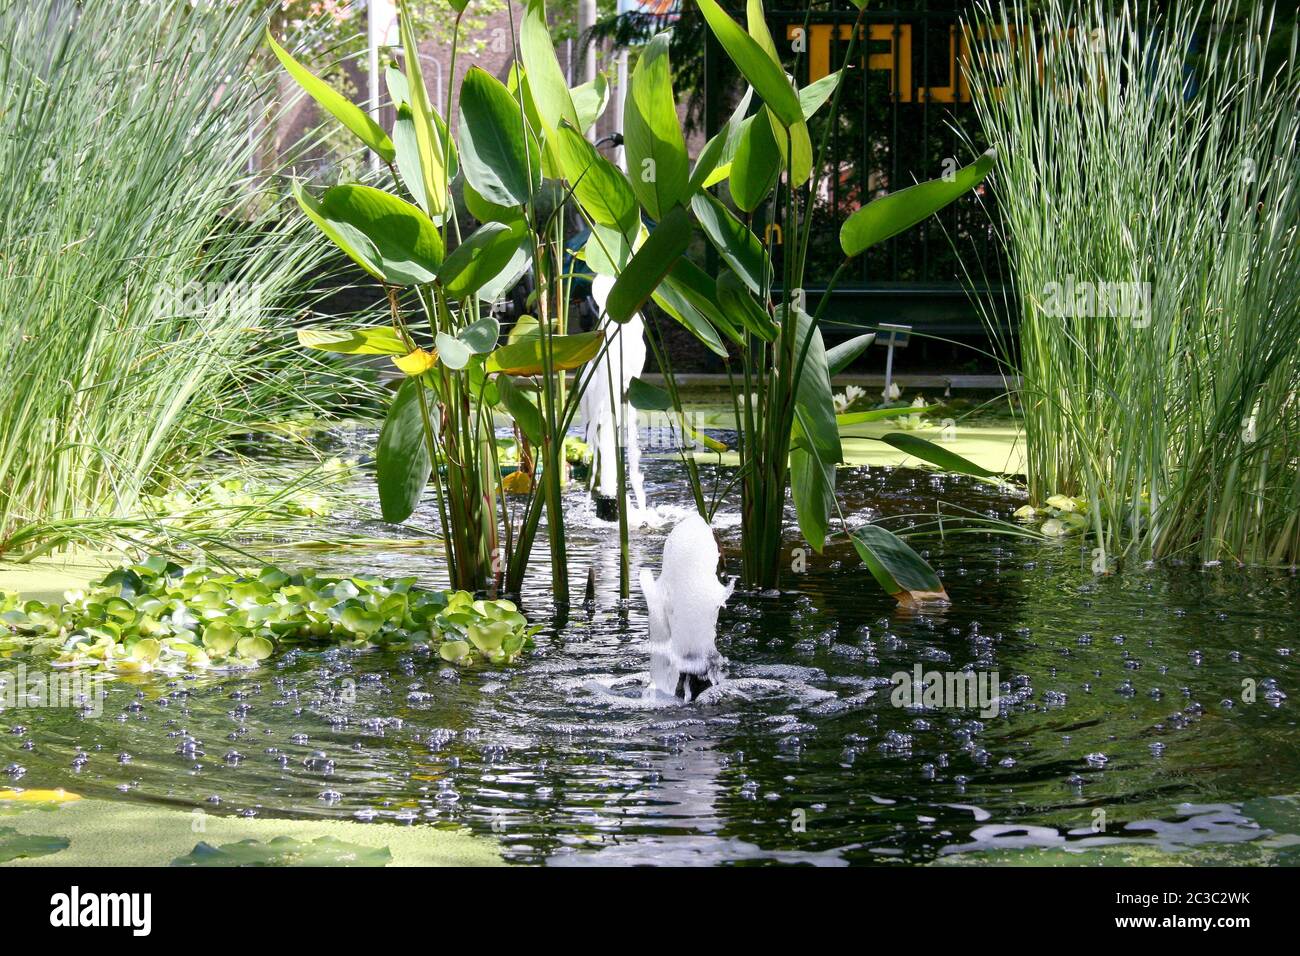 a small pond with a water feature Stock Photo